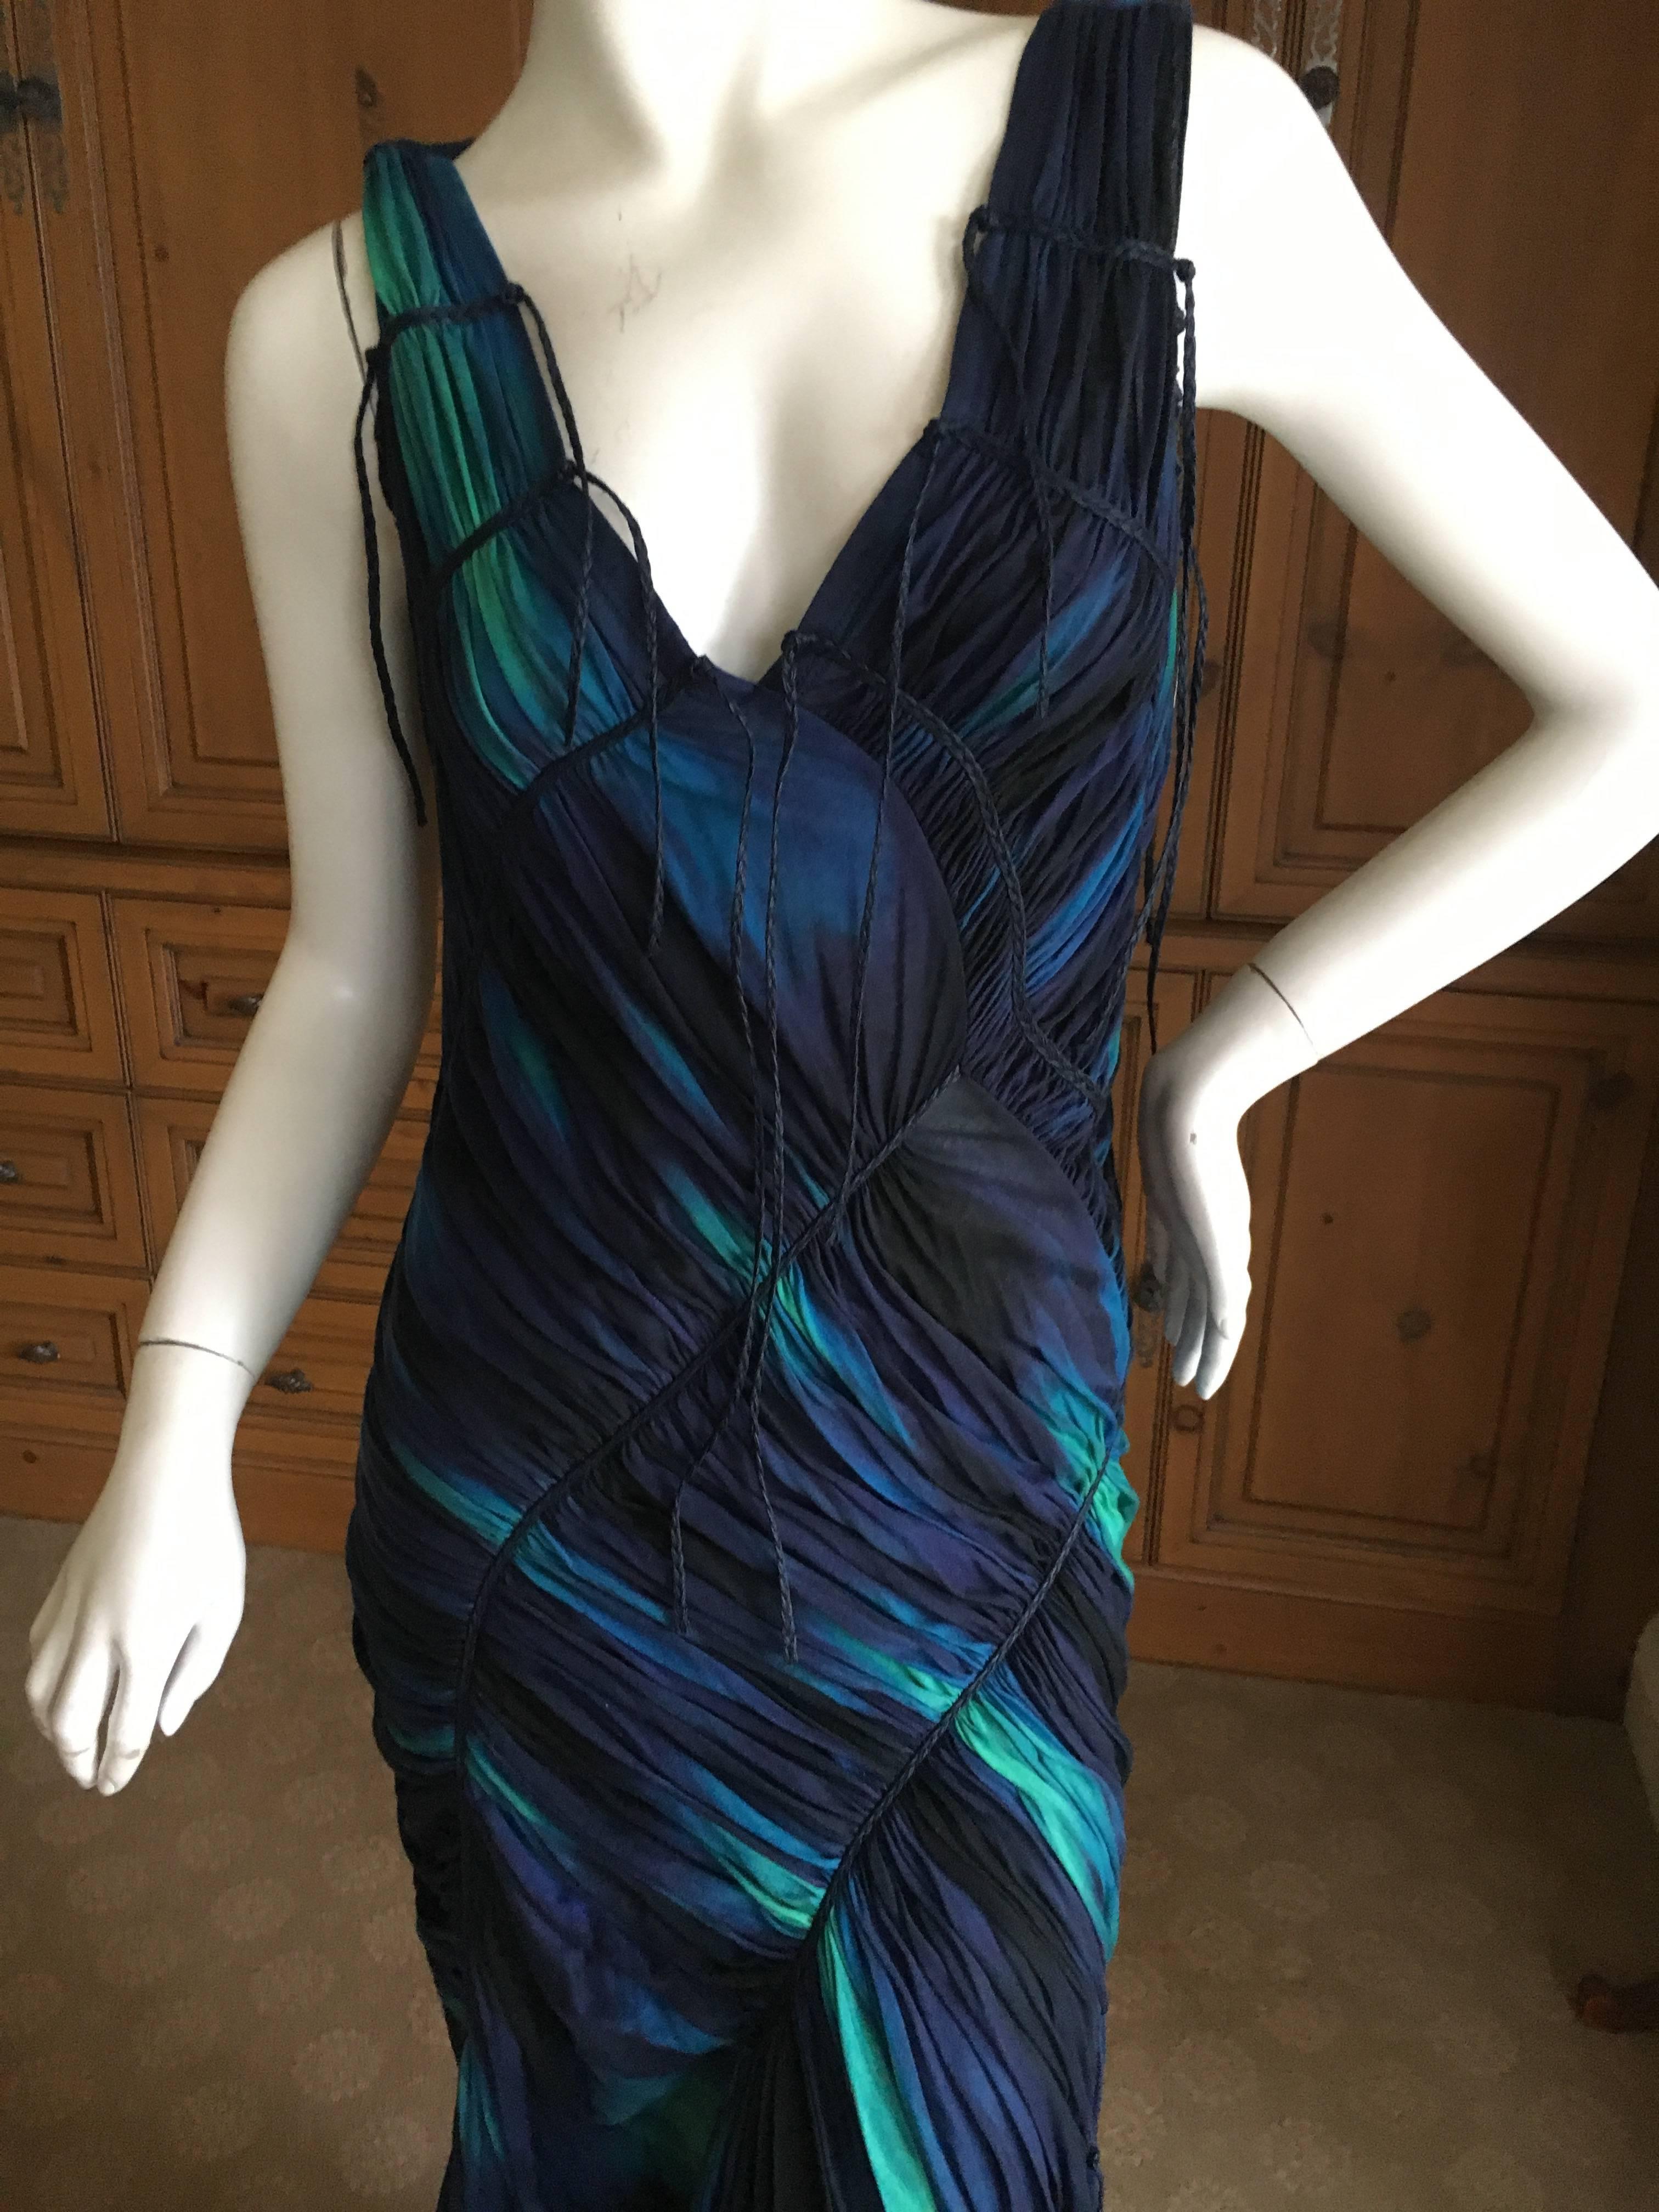 Purple Issey Miyake Bergdorf Goodman 1990's Tie Dye Ruched Dress New with Tags